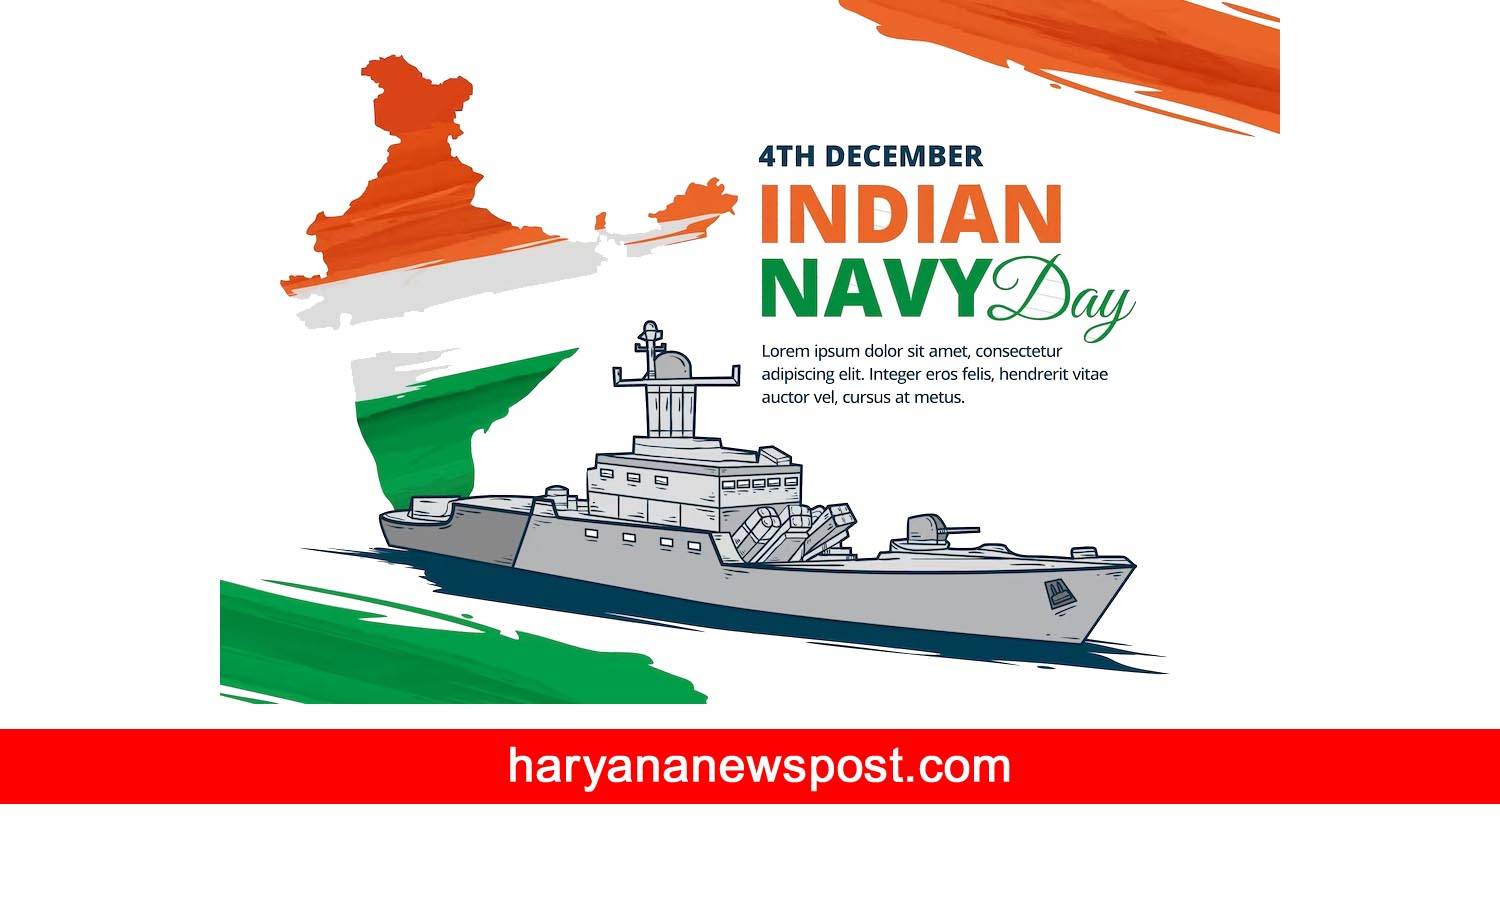 Happy Indian Navy Day wishes